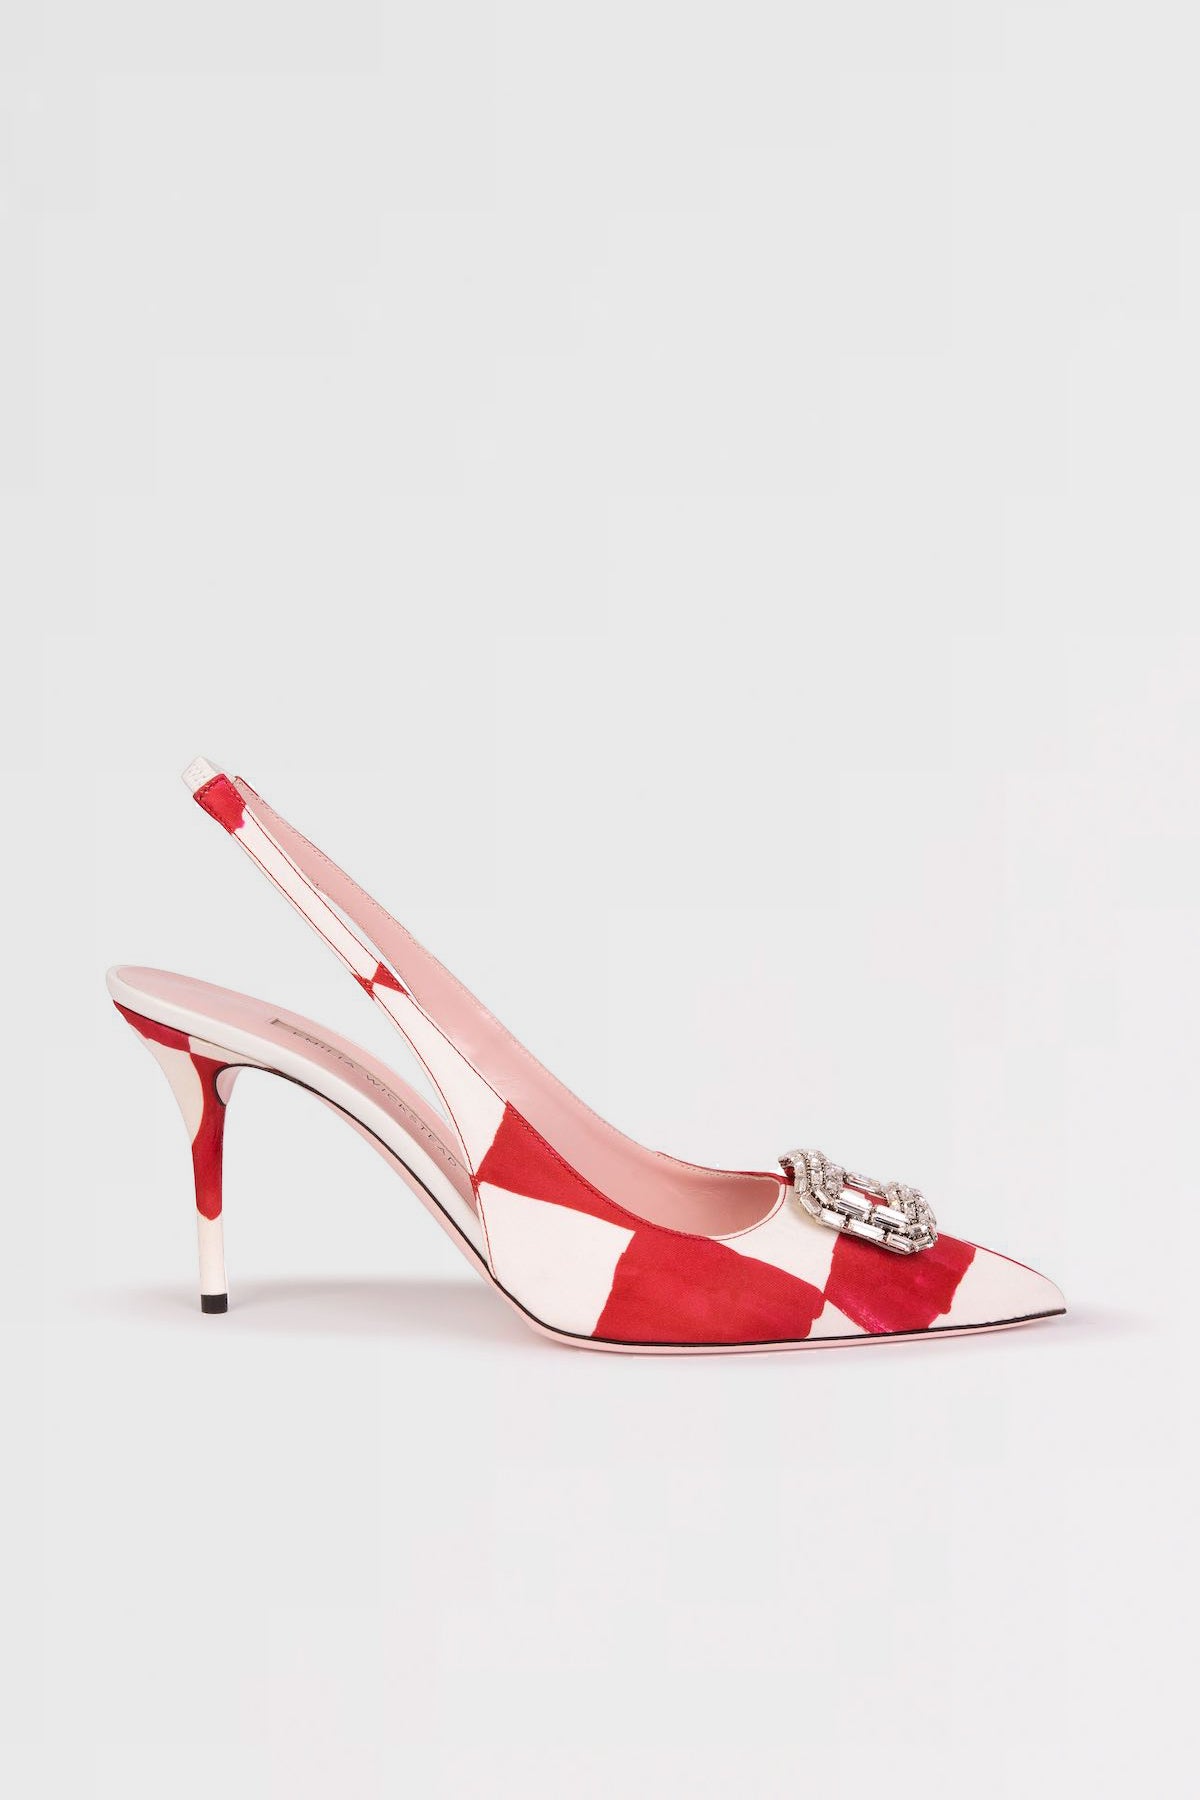 Paloma High Heels | Red Checkerboard Print Sling-Back Heels with Crystal Buckle | Emilia Wickstead